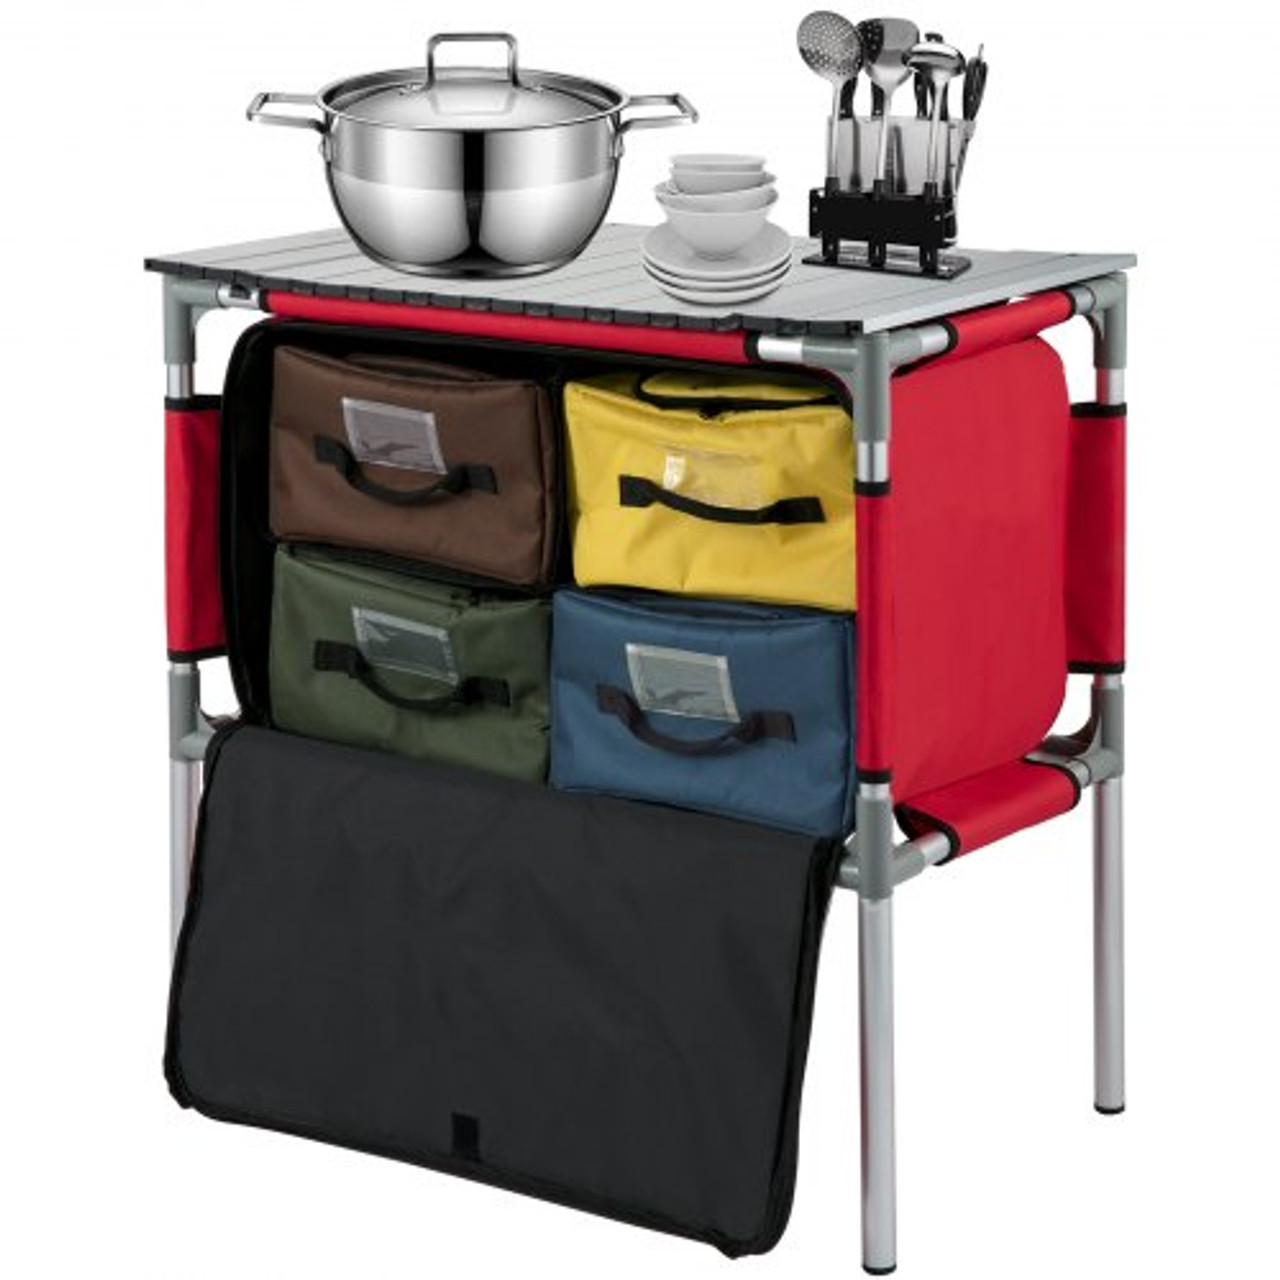 Camping Kitchen Table, Aluminum Portable Folding Station with 4 Storage, 4 Detachable Legs and Carry Bag, Quick Installation for Outdoor Picnic Beach Party Cooking, Red